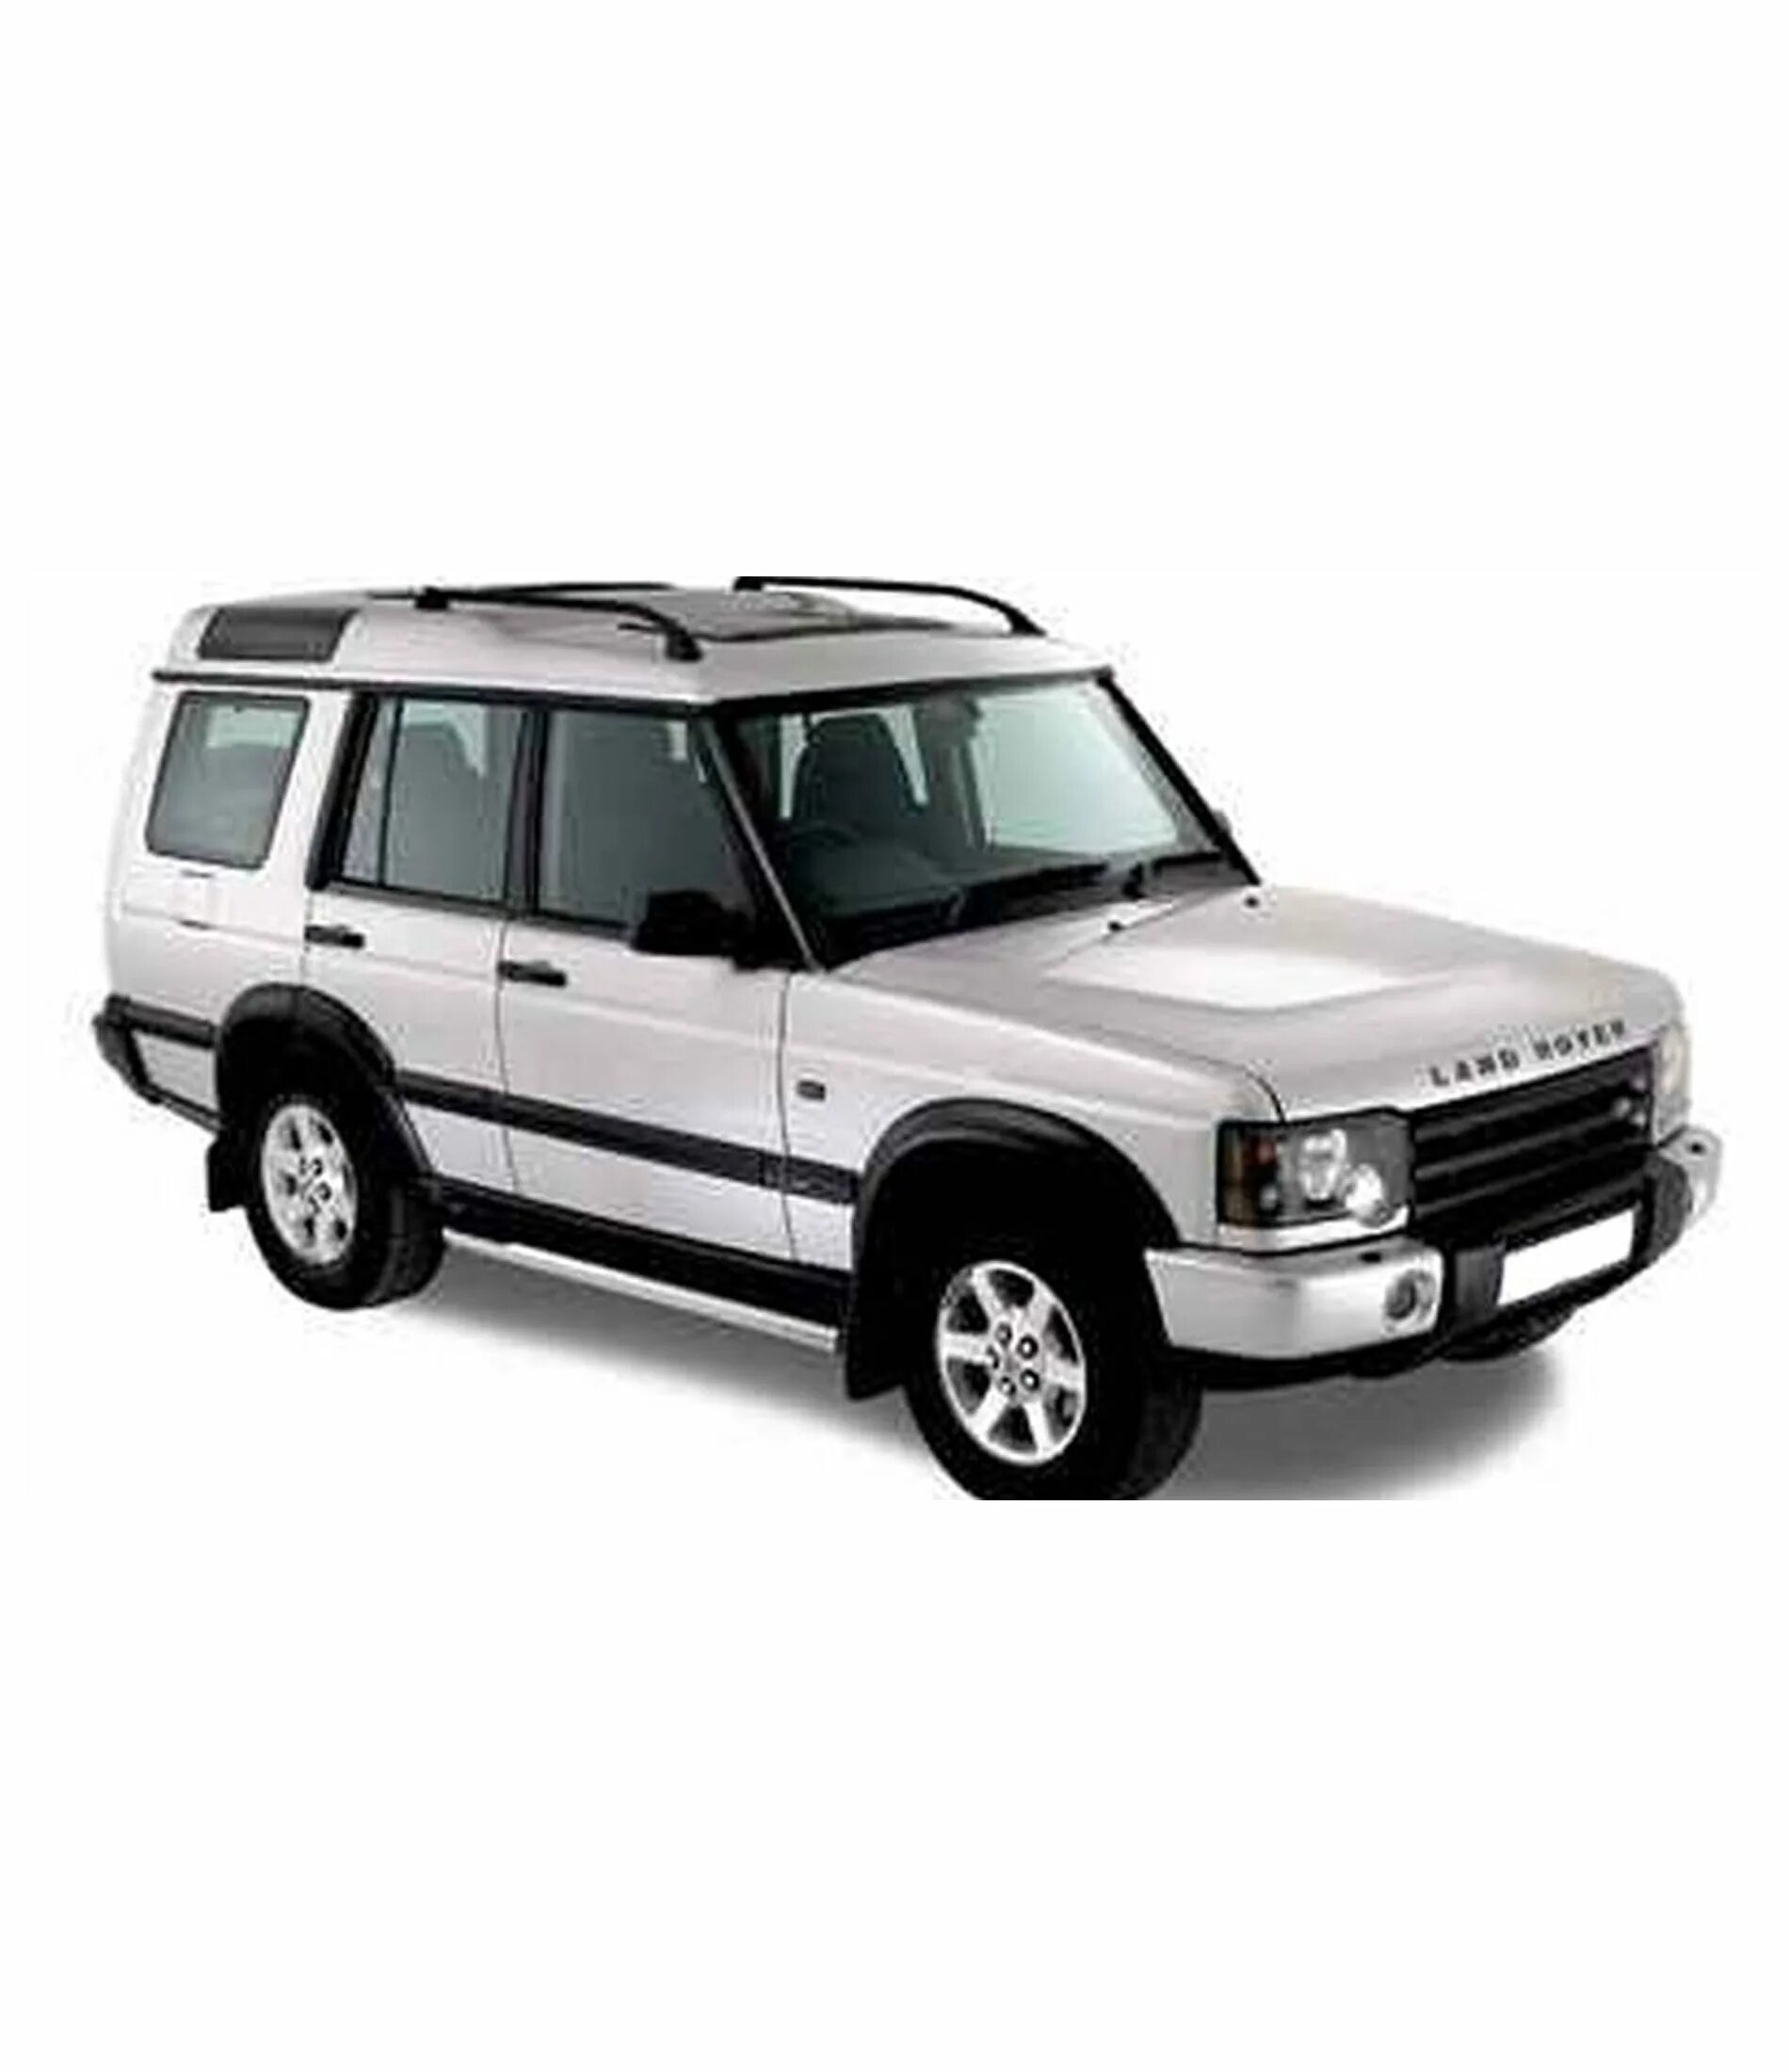 Тд дискавери. Land Rover Discovery II 1998-2004. Land Rover Discovery 1997. Land Rover Discovery 1998. Land Rover Discovery 2004.